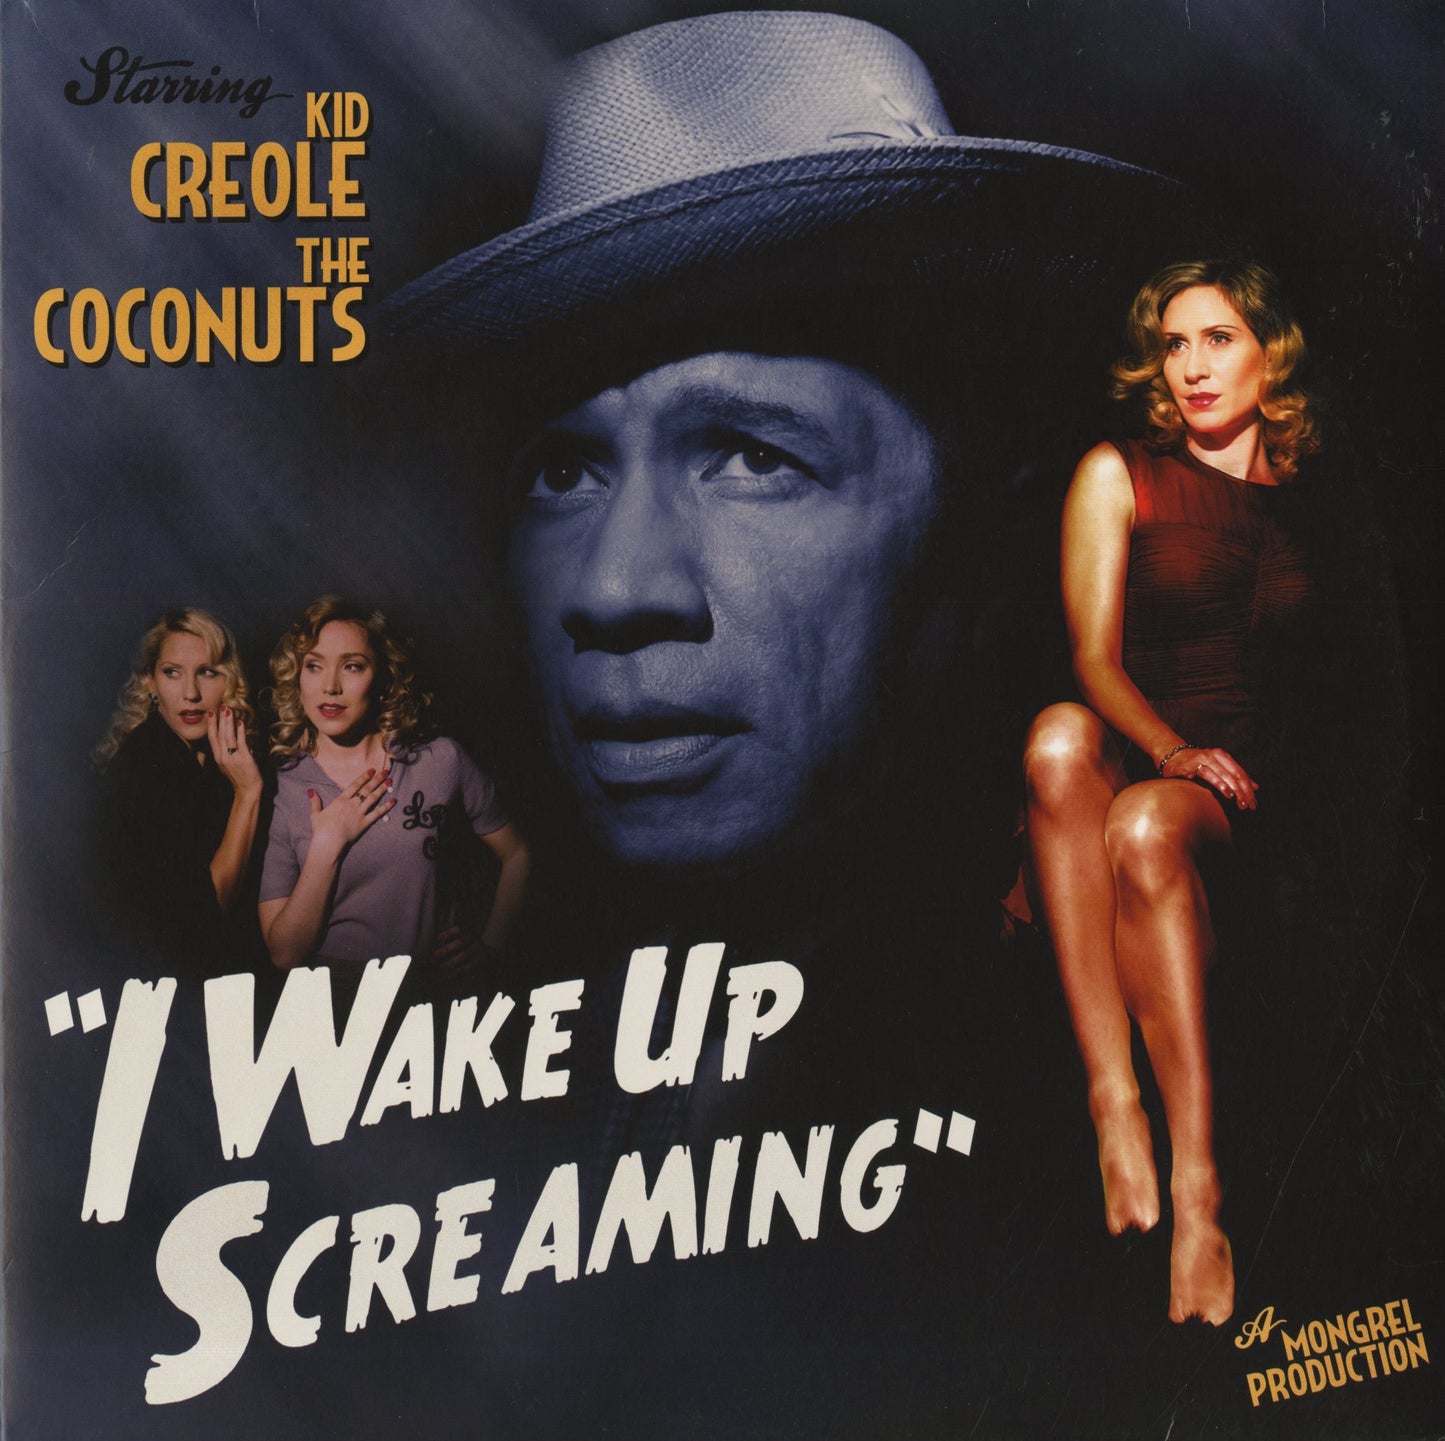 Kid Creole And The Coconuts / I Wake Up Screaming (STRUT055LP)